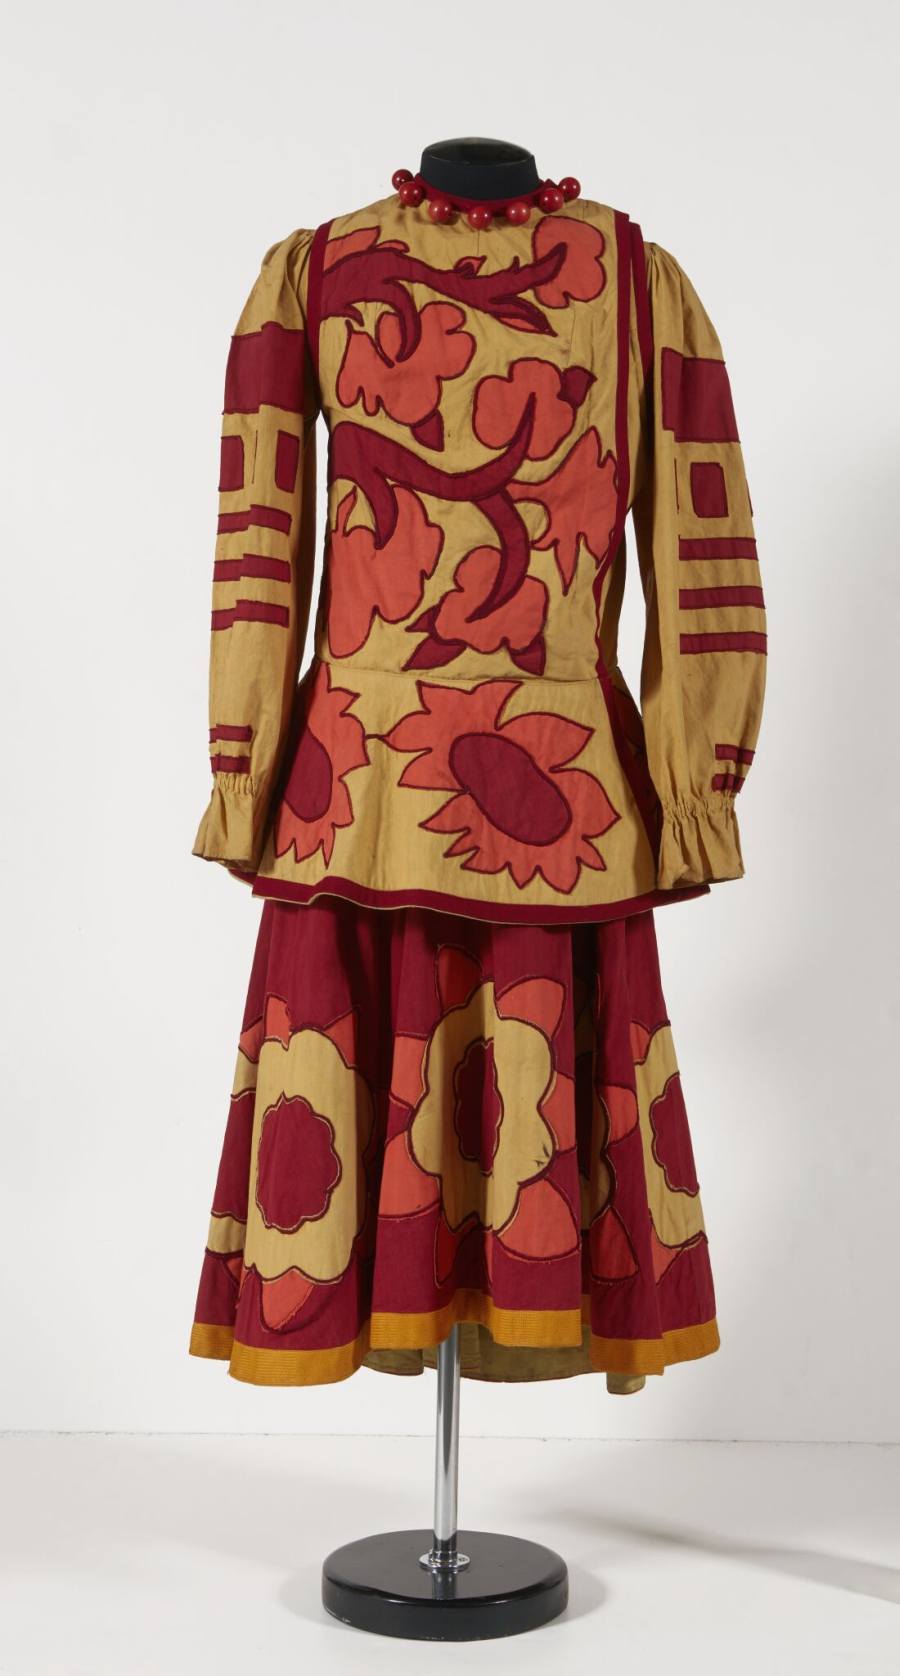 9. N.Goncharova (1881 – 1962), woman's costume for "The Golden Cockerel", chor.: M.Fokine, for the 1937 production od the Ballets Russes de Monte Carlo; cotton fabric, elastic band, woolen thread, metal sewing buttons, wool braid, weaving, sewing, embroidery, applique; private collection of O. and I.Mazur, London © Tretyakov Gallery